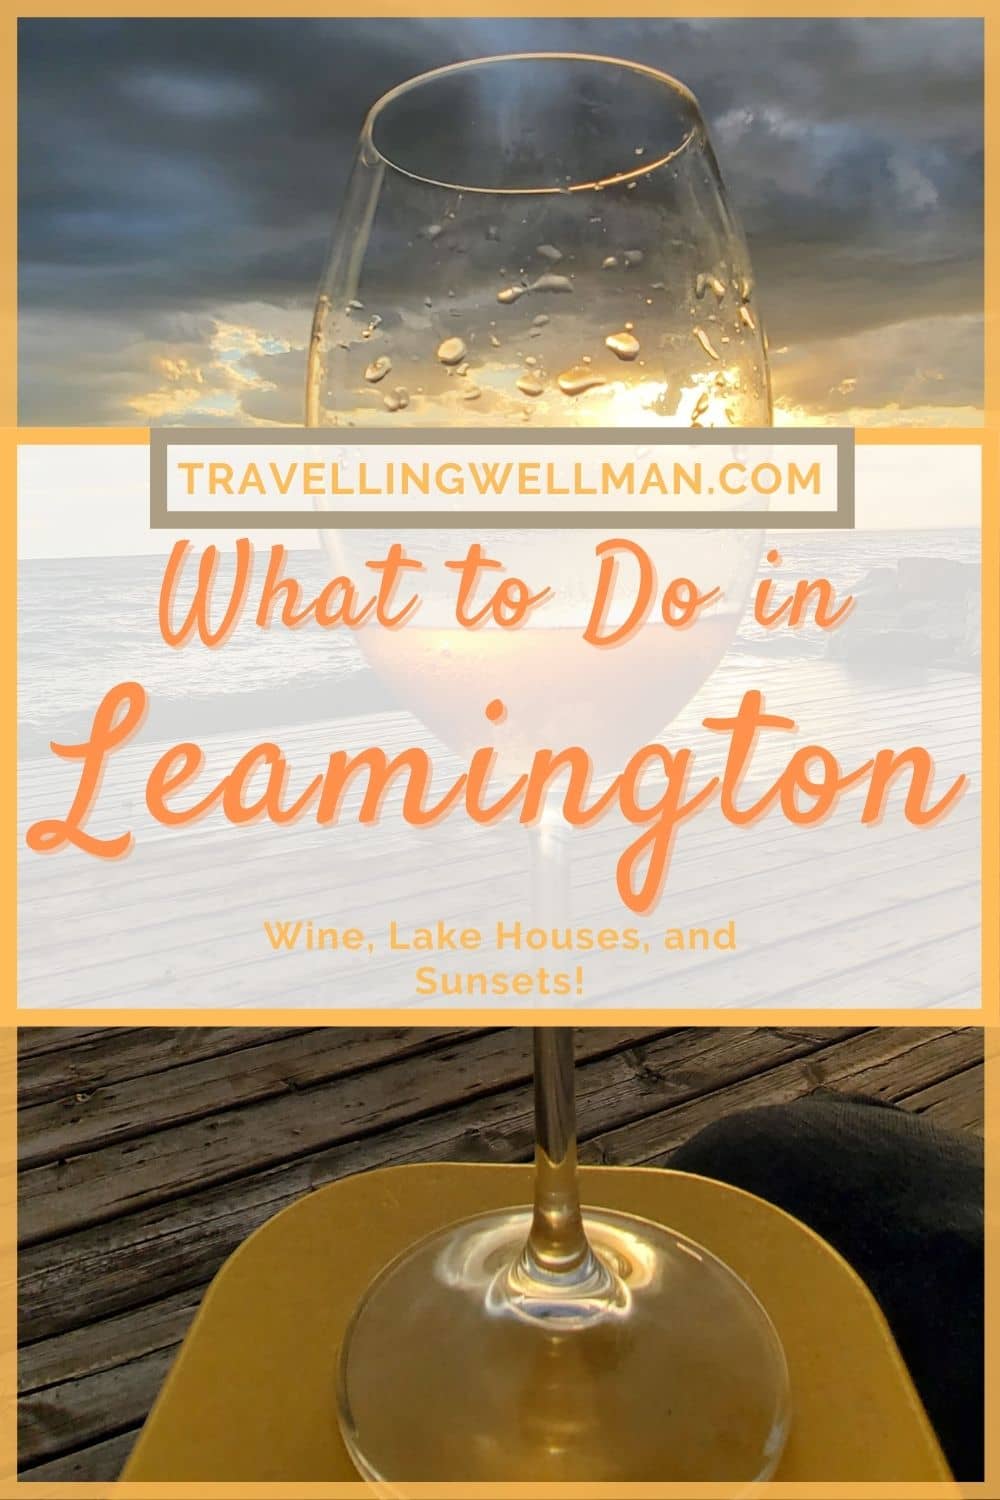 What to do in Leamington